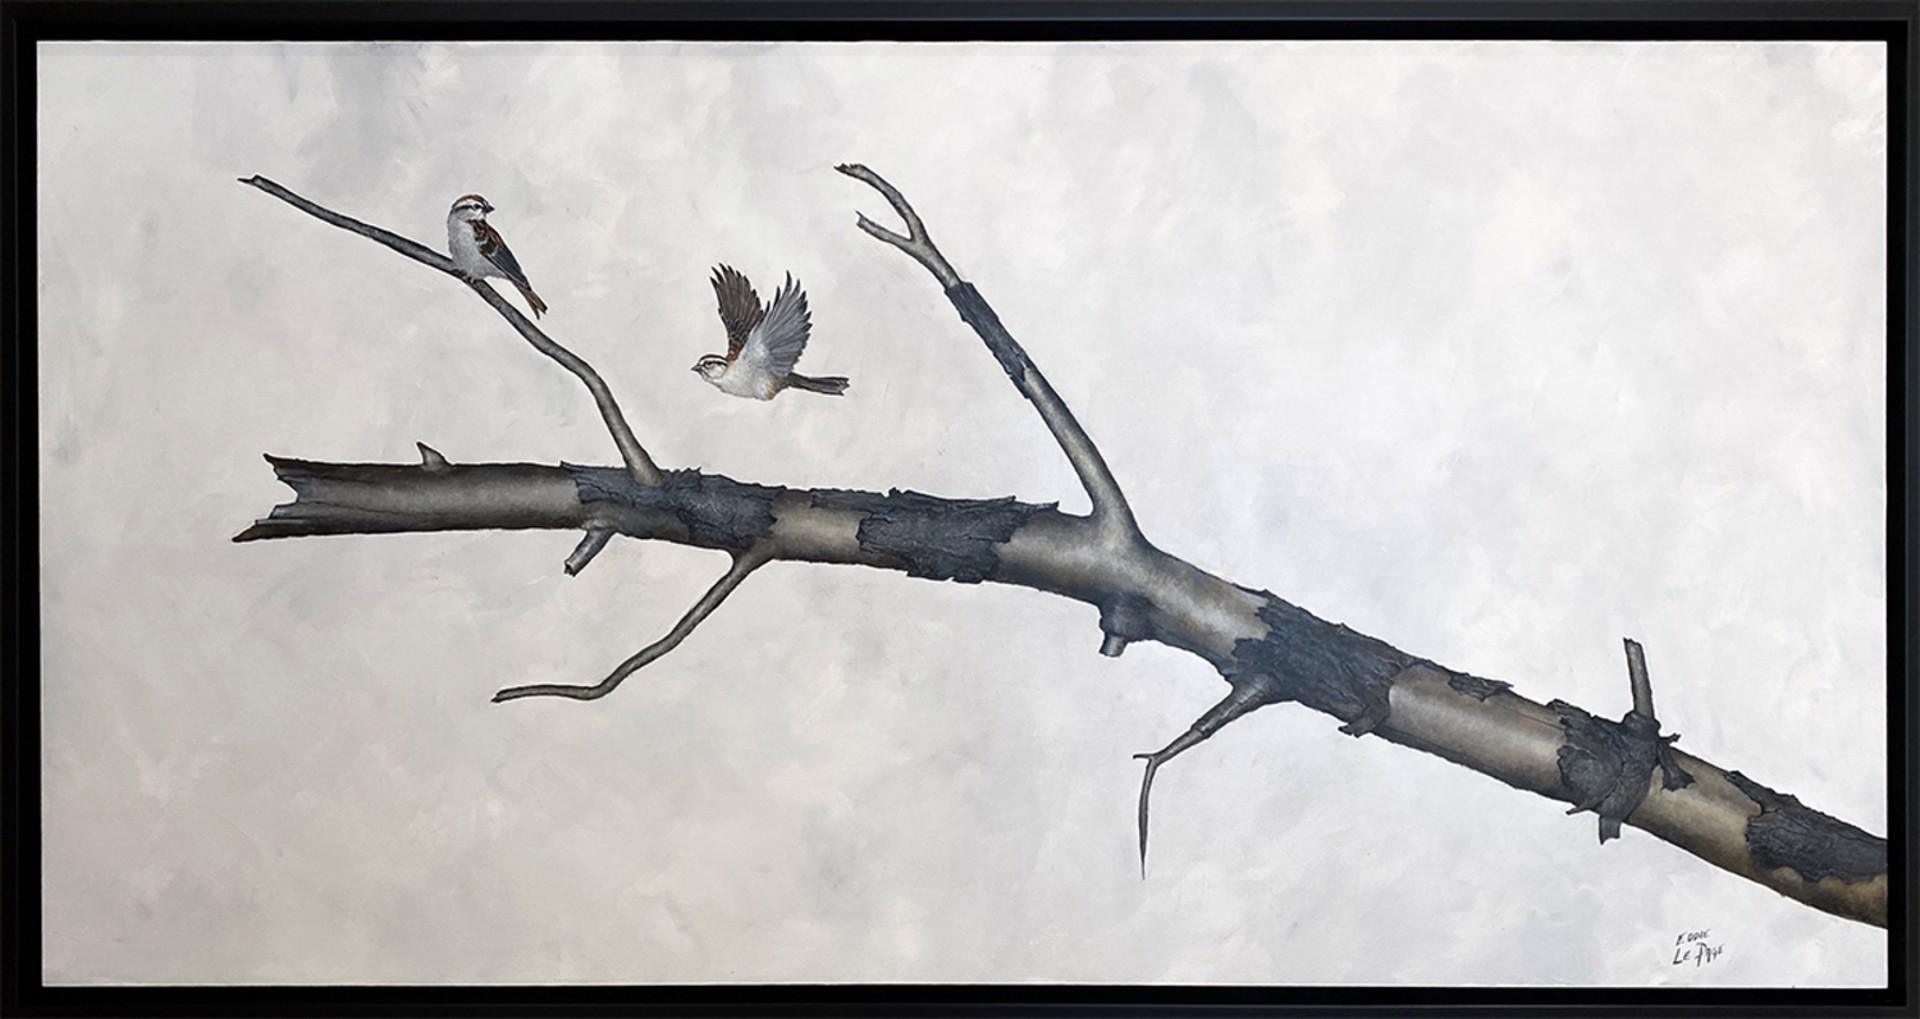 Chipping Sparrows by Eddie LePage